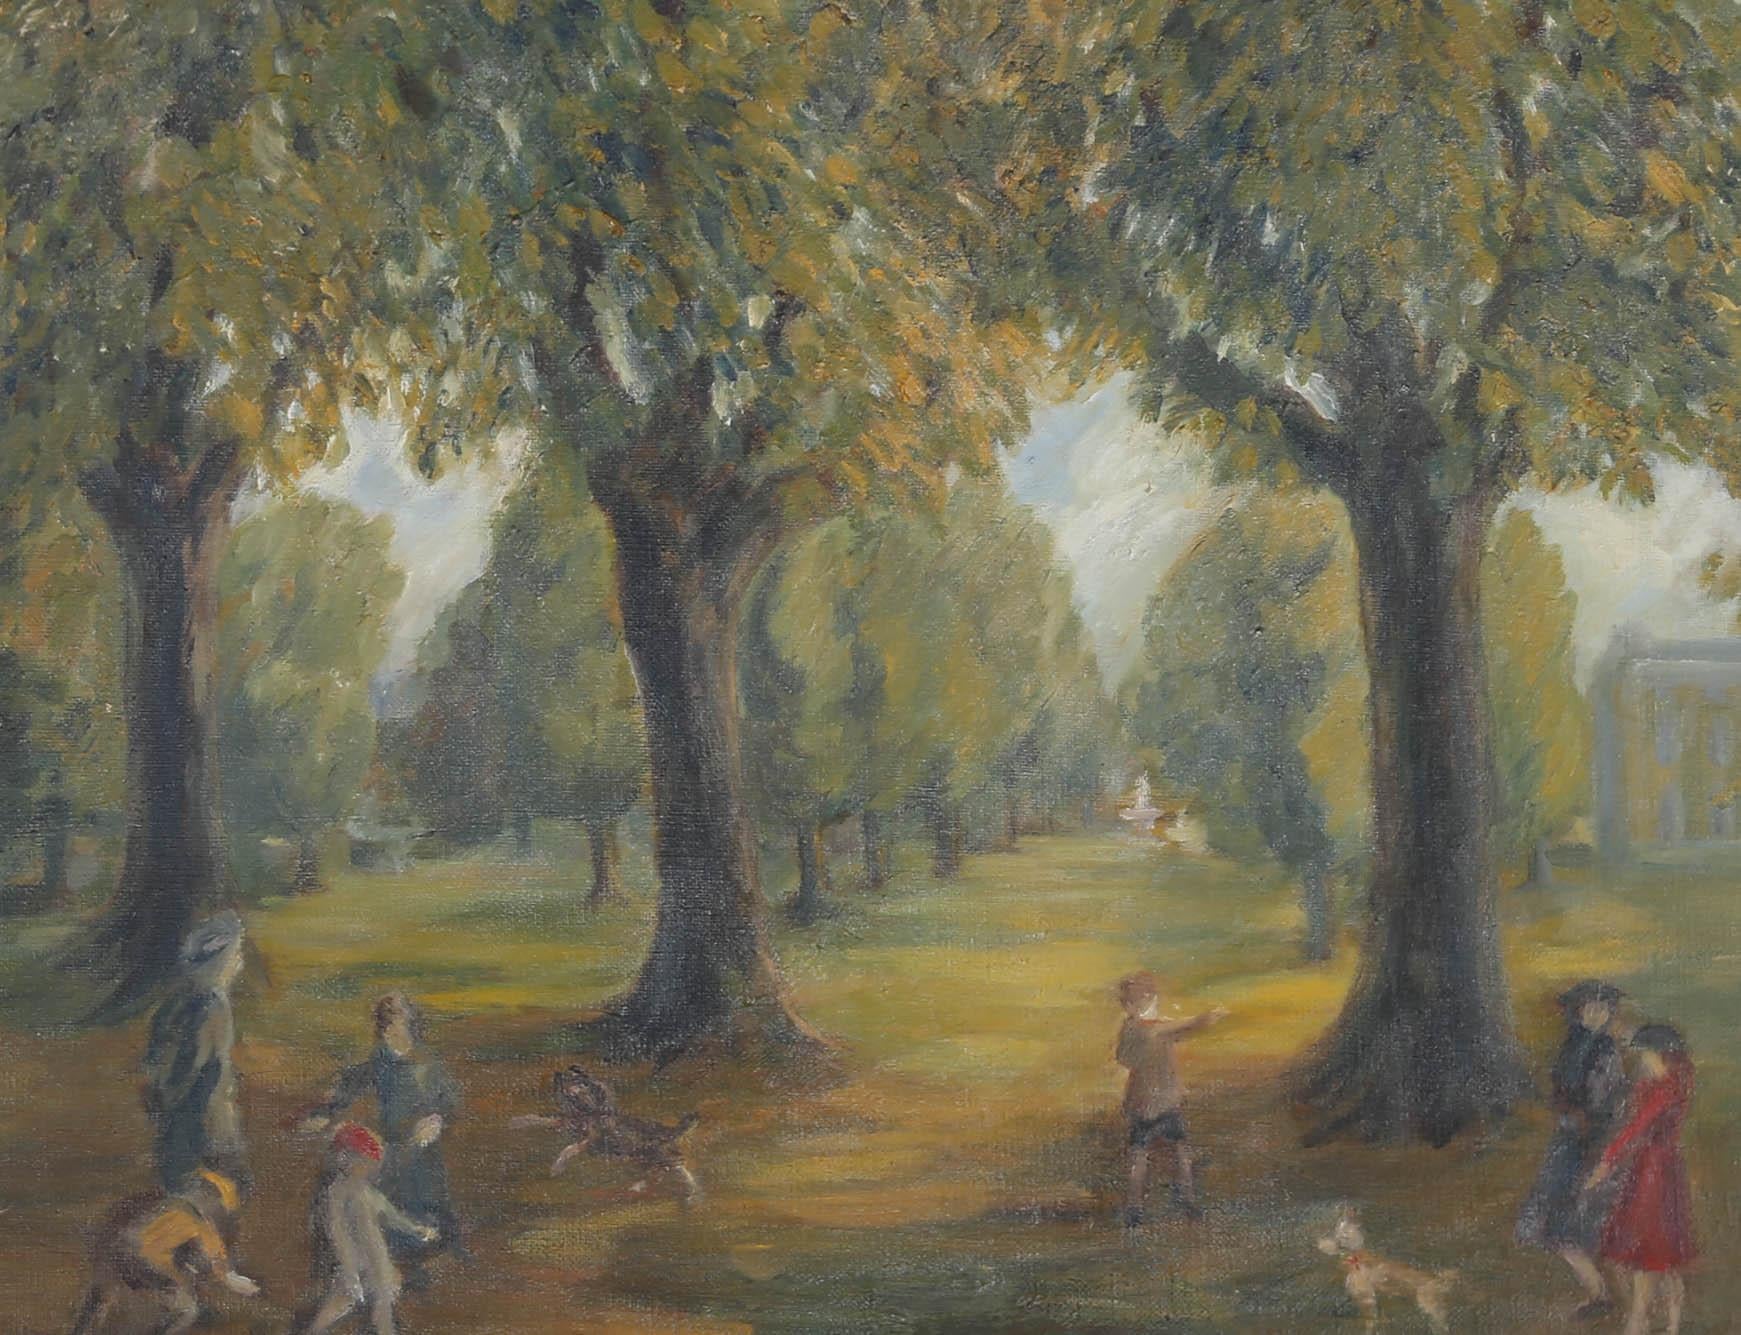 This summer feeling, oil landscape depicts a group of spritely children playing in the park. The families dogs can be seen running circles around the excitable children, while the two mothers seem happy chatting to one side. The painting is signed